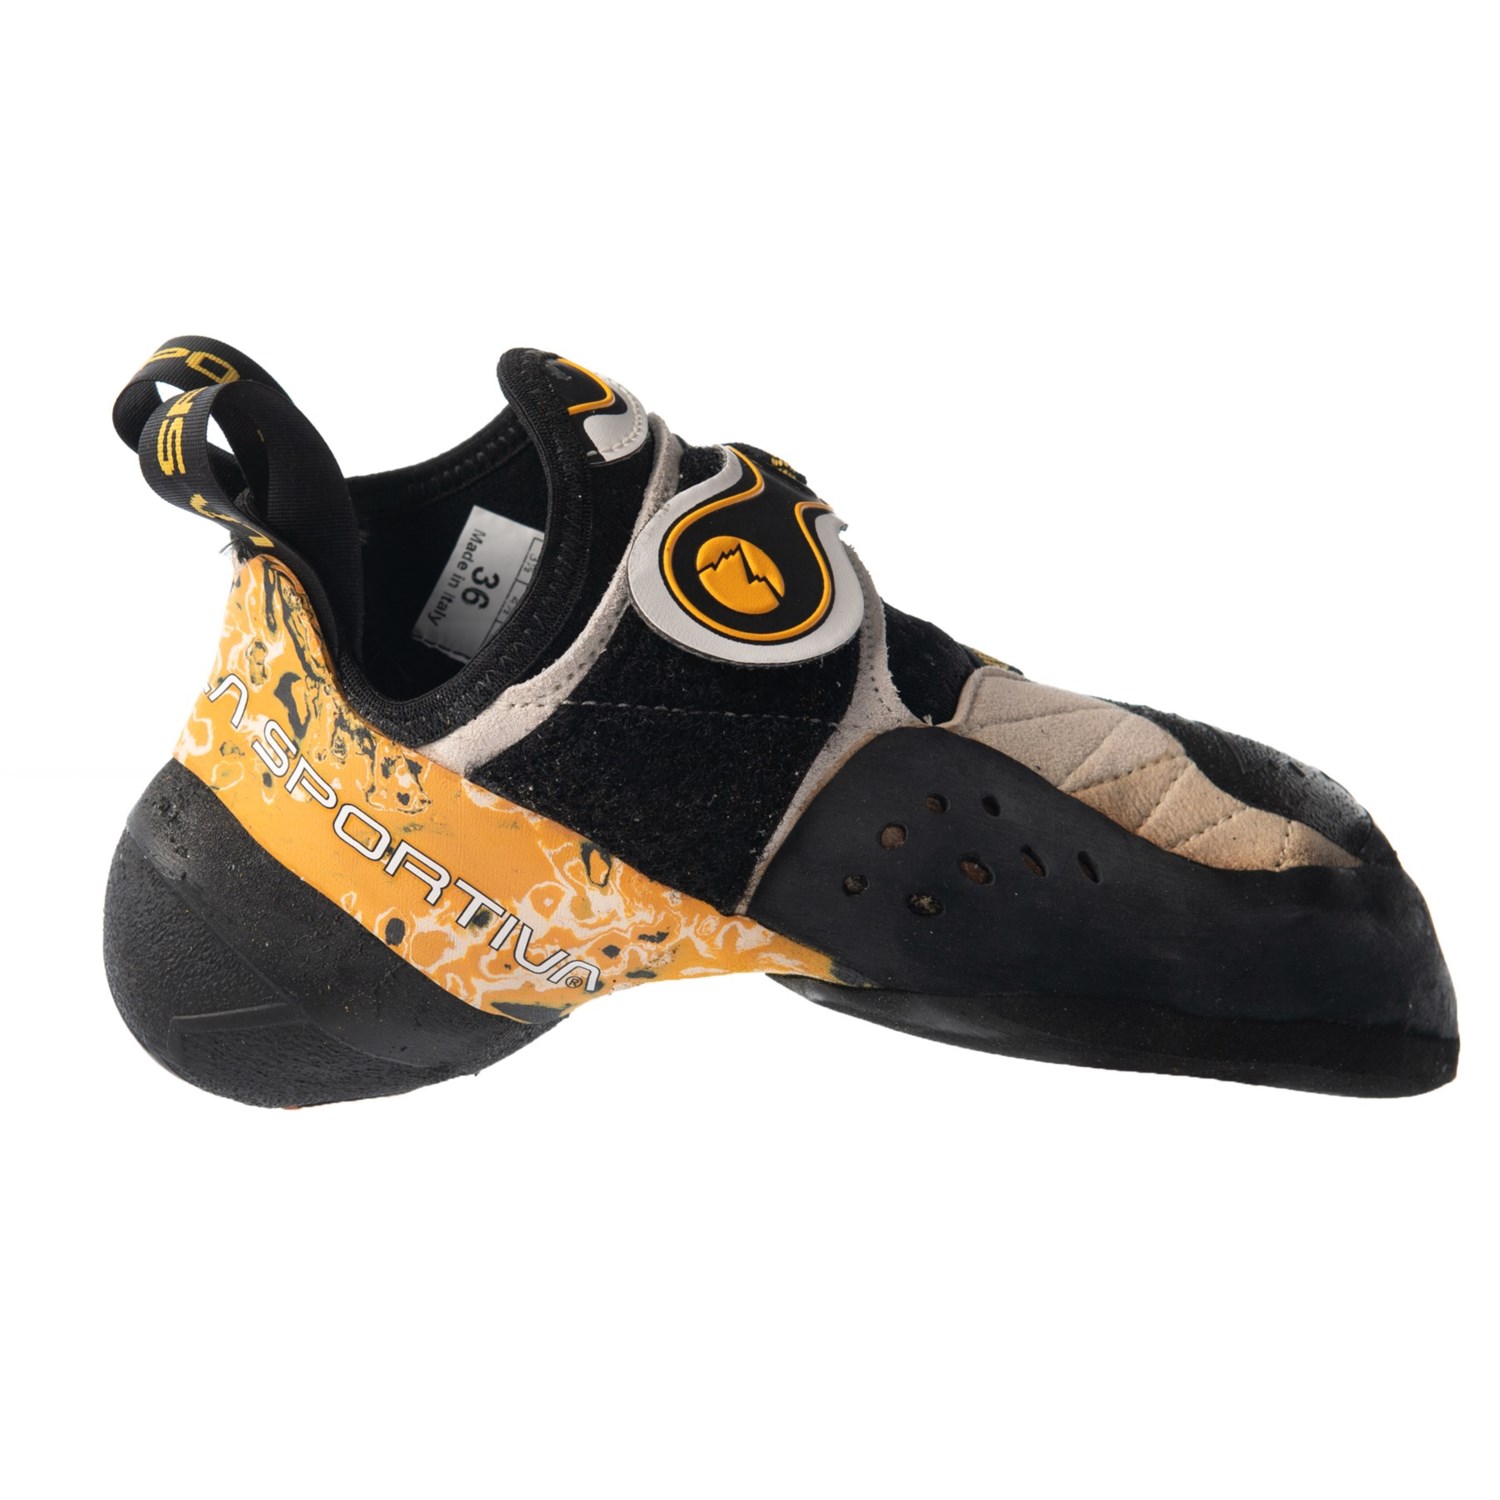 la sportiva solution sizing review